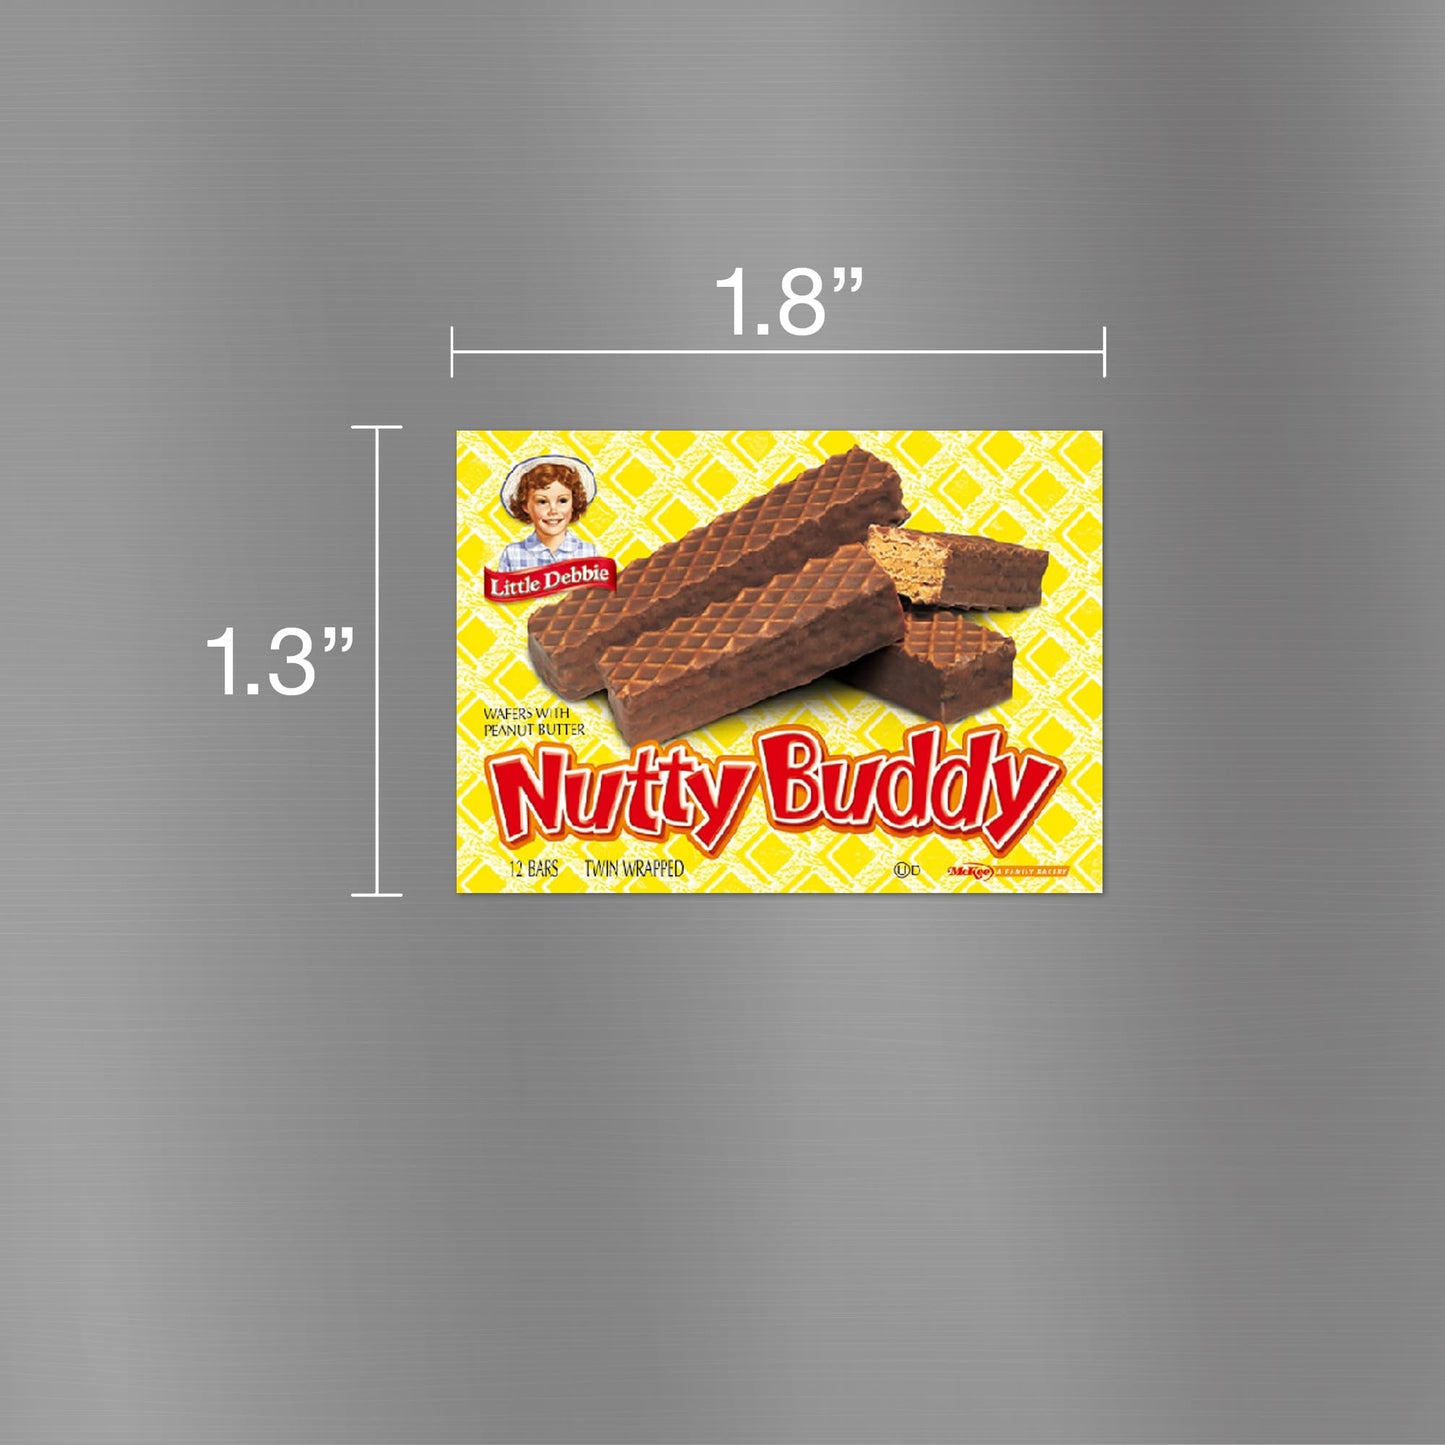 Image of a Little Debbie Nutty Buddy carton magnet, measuring 1.8 inches wide and 1.3 inches tall. The magnet displays the iconic yellow and red packaging with images of the Nutty Buddy wafer bars and the Little Debbie logo. The background features a pattern of yellow diagonal lines, enhancing the visual appeal of the snack's packaging.